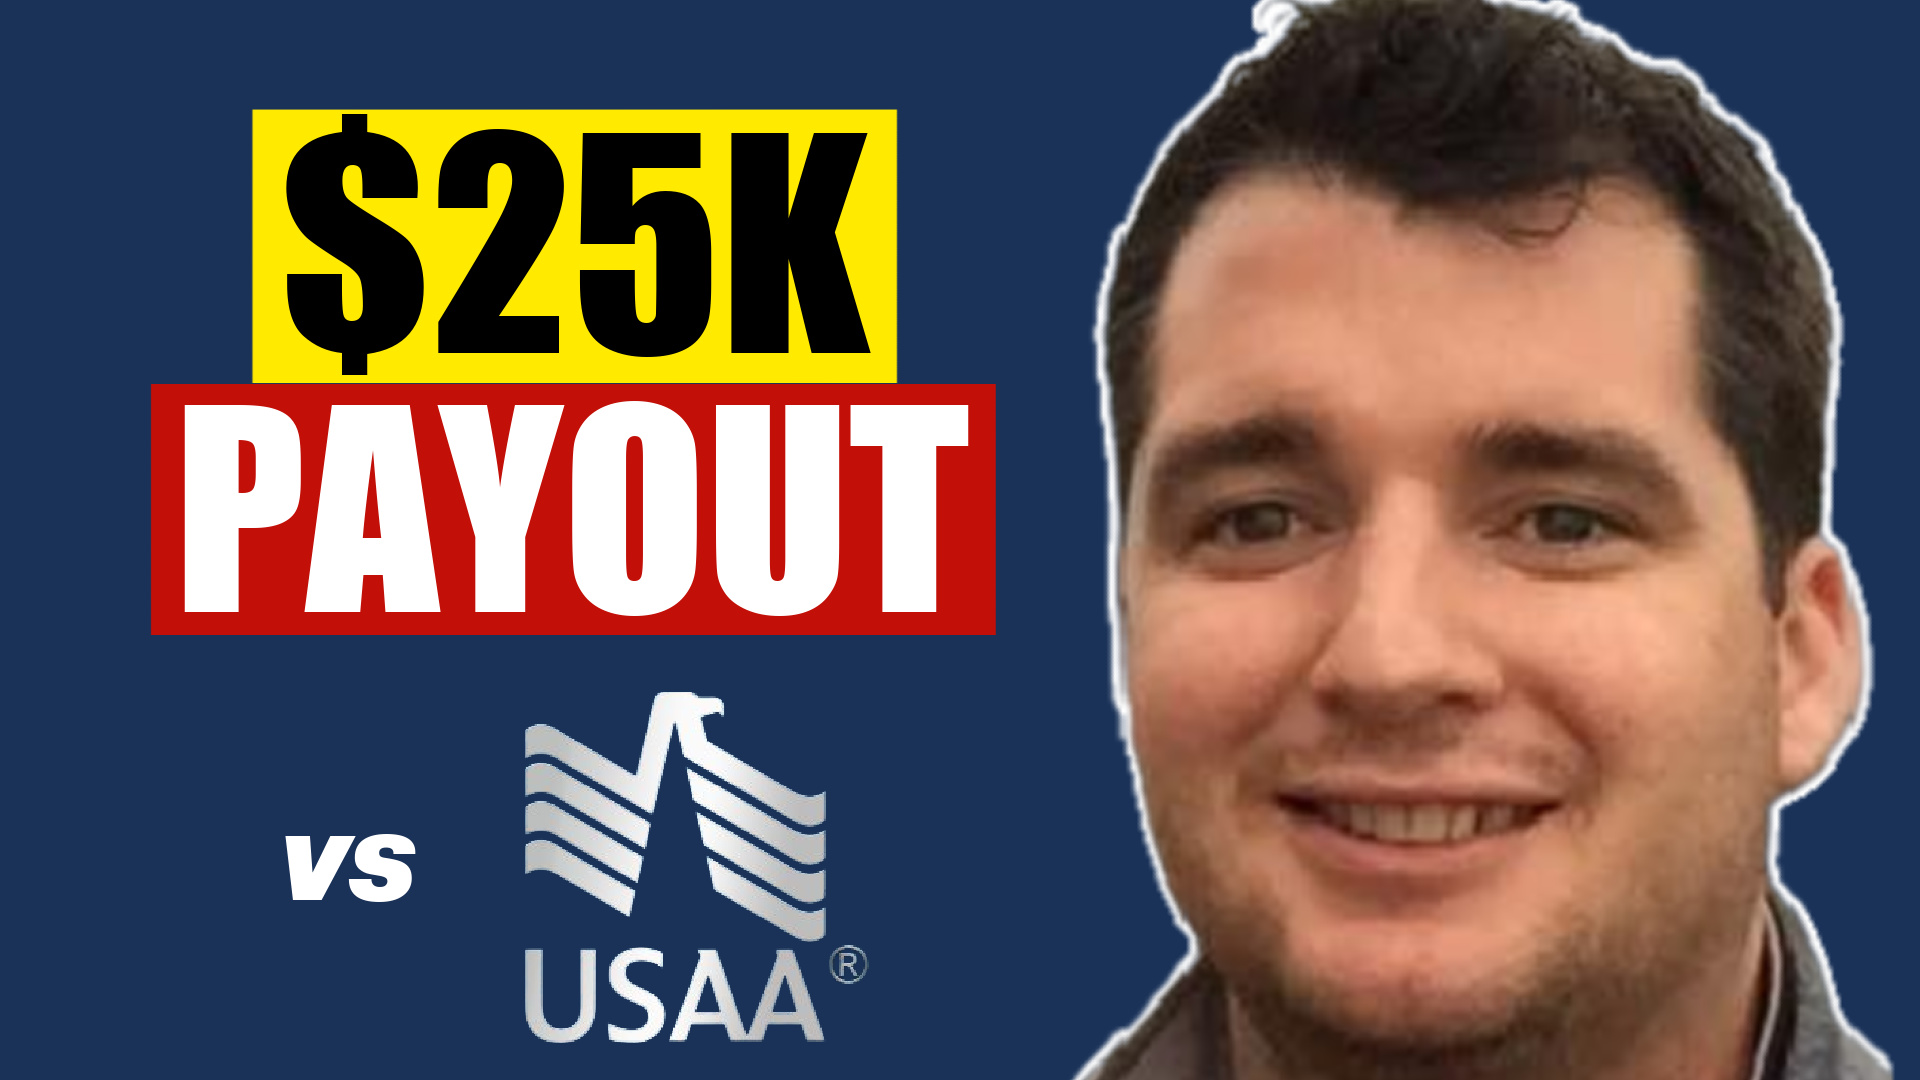 $25K Payout vs USAA (our happy client smiling)